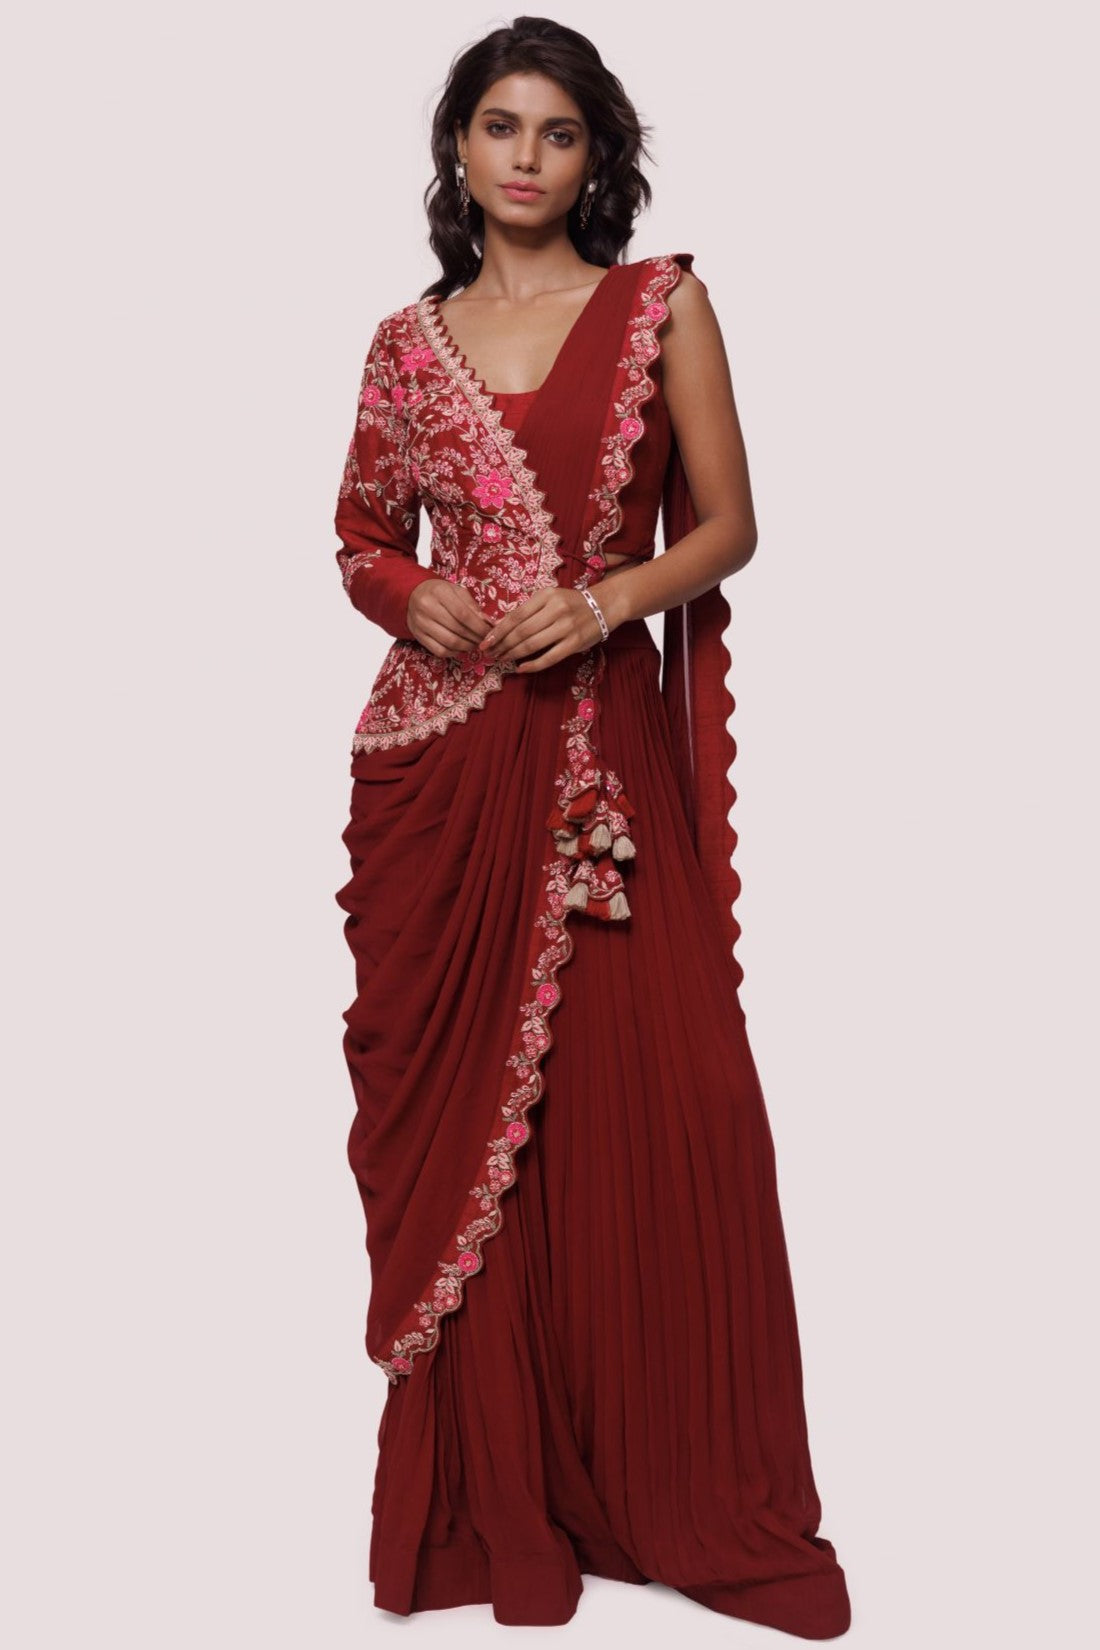 Buy beautiful dark red drape saree online in USA with embroidered half jacket. Look your best at parties and weddings in beautiful designer sarees, embroidered sarees, handwoven sarees, silk sarees, organza saris from Pure Elegance Indian saree store in USA.-full view